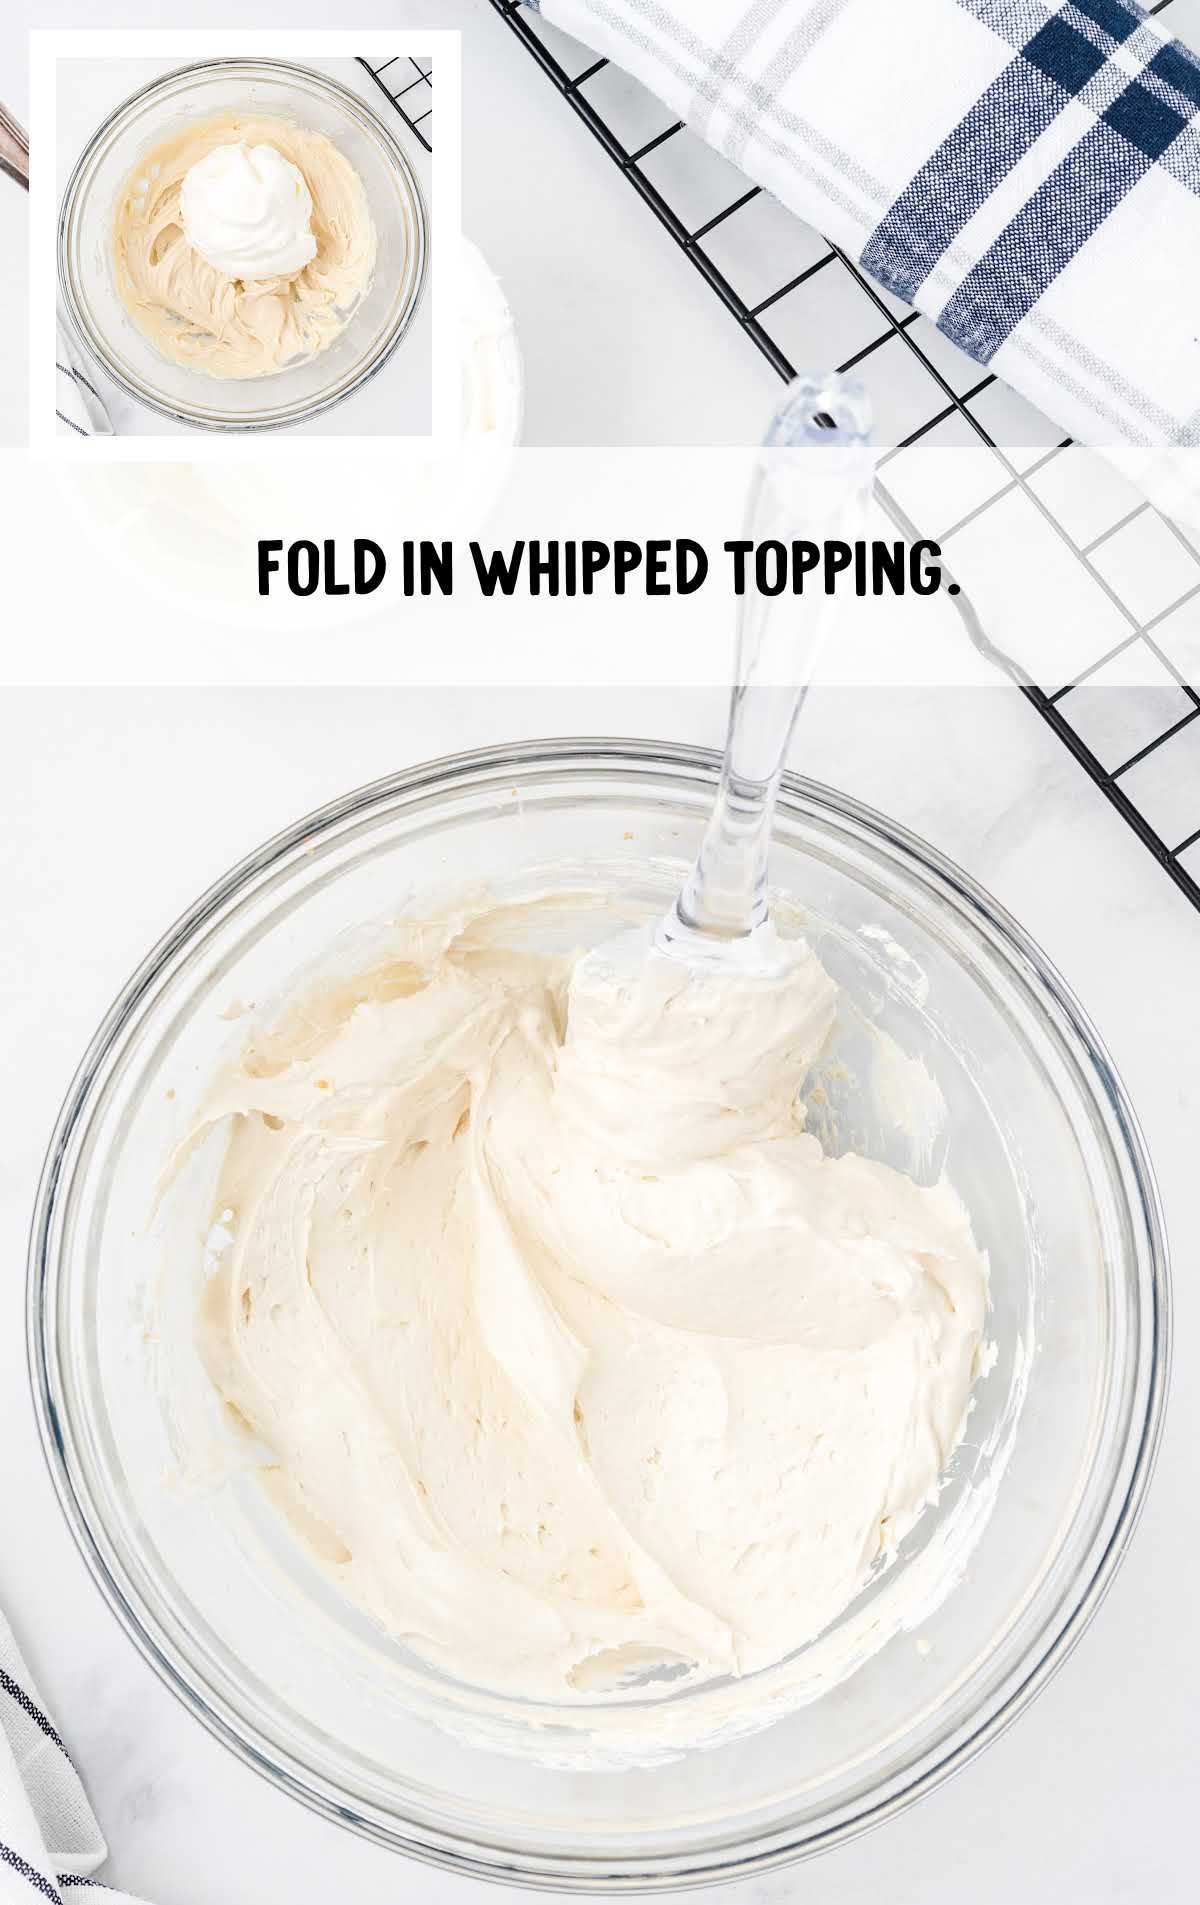 whipped topping folded in a bowl